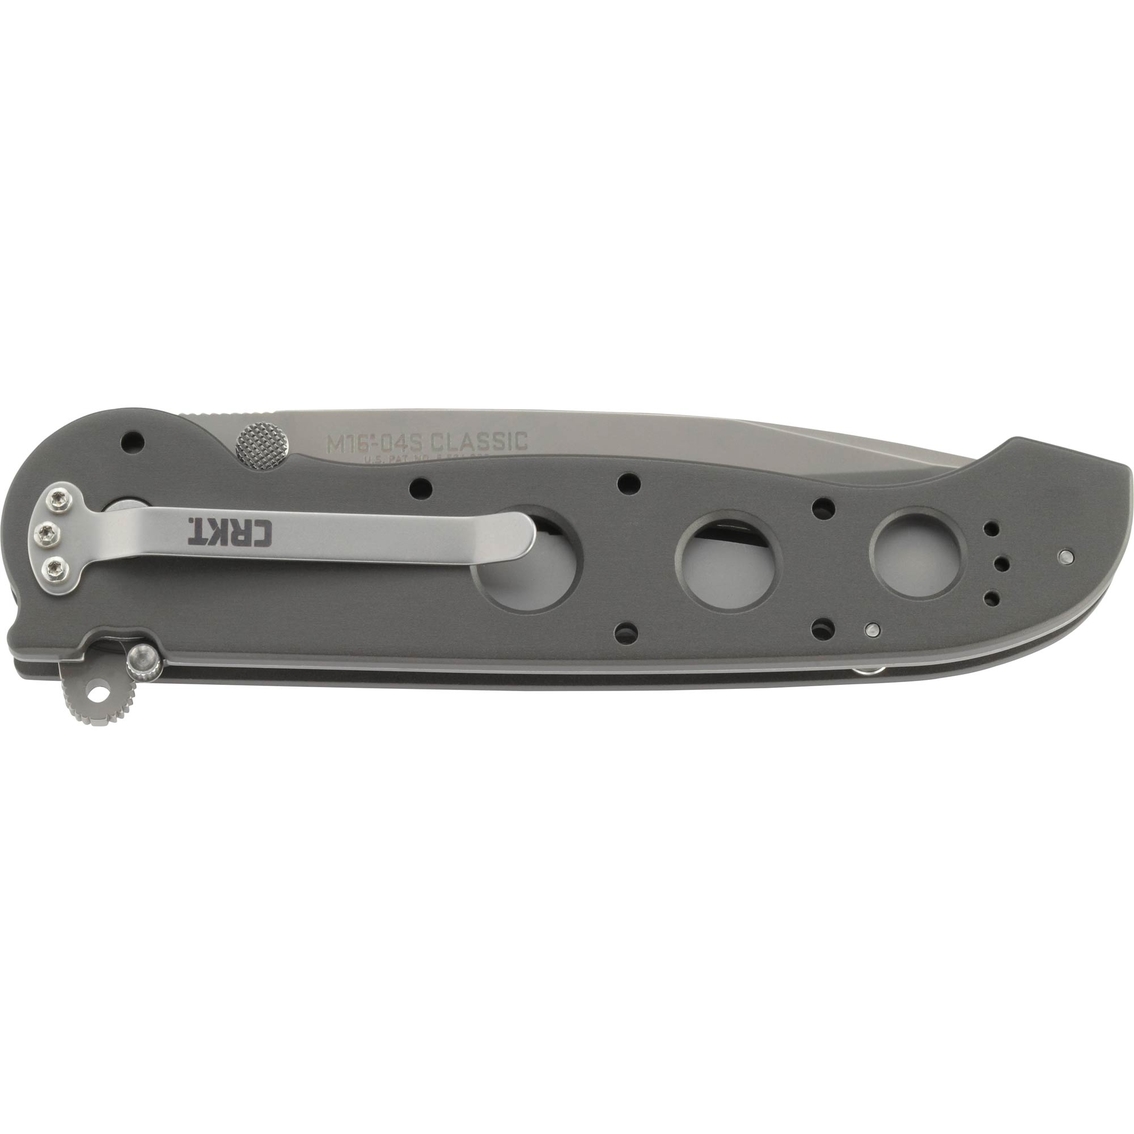 Columbia River Knife & Tool M16 -04S Classic Clip Folder Knife - Image 2 of 4